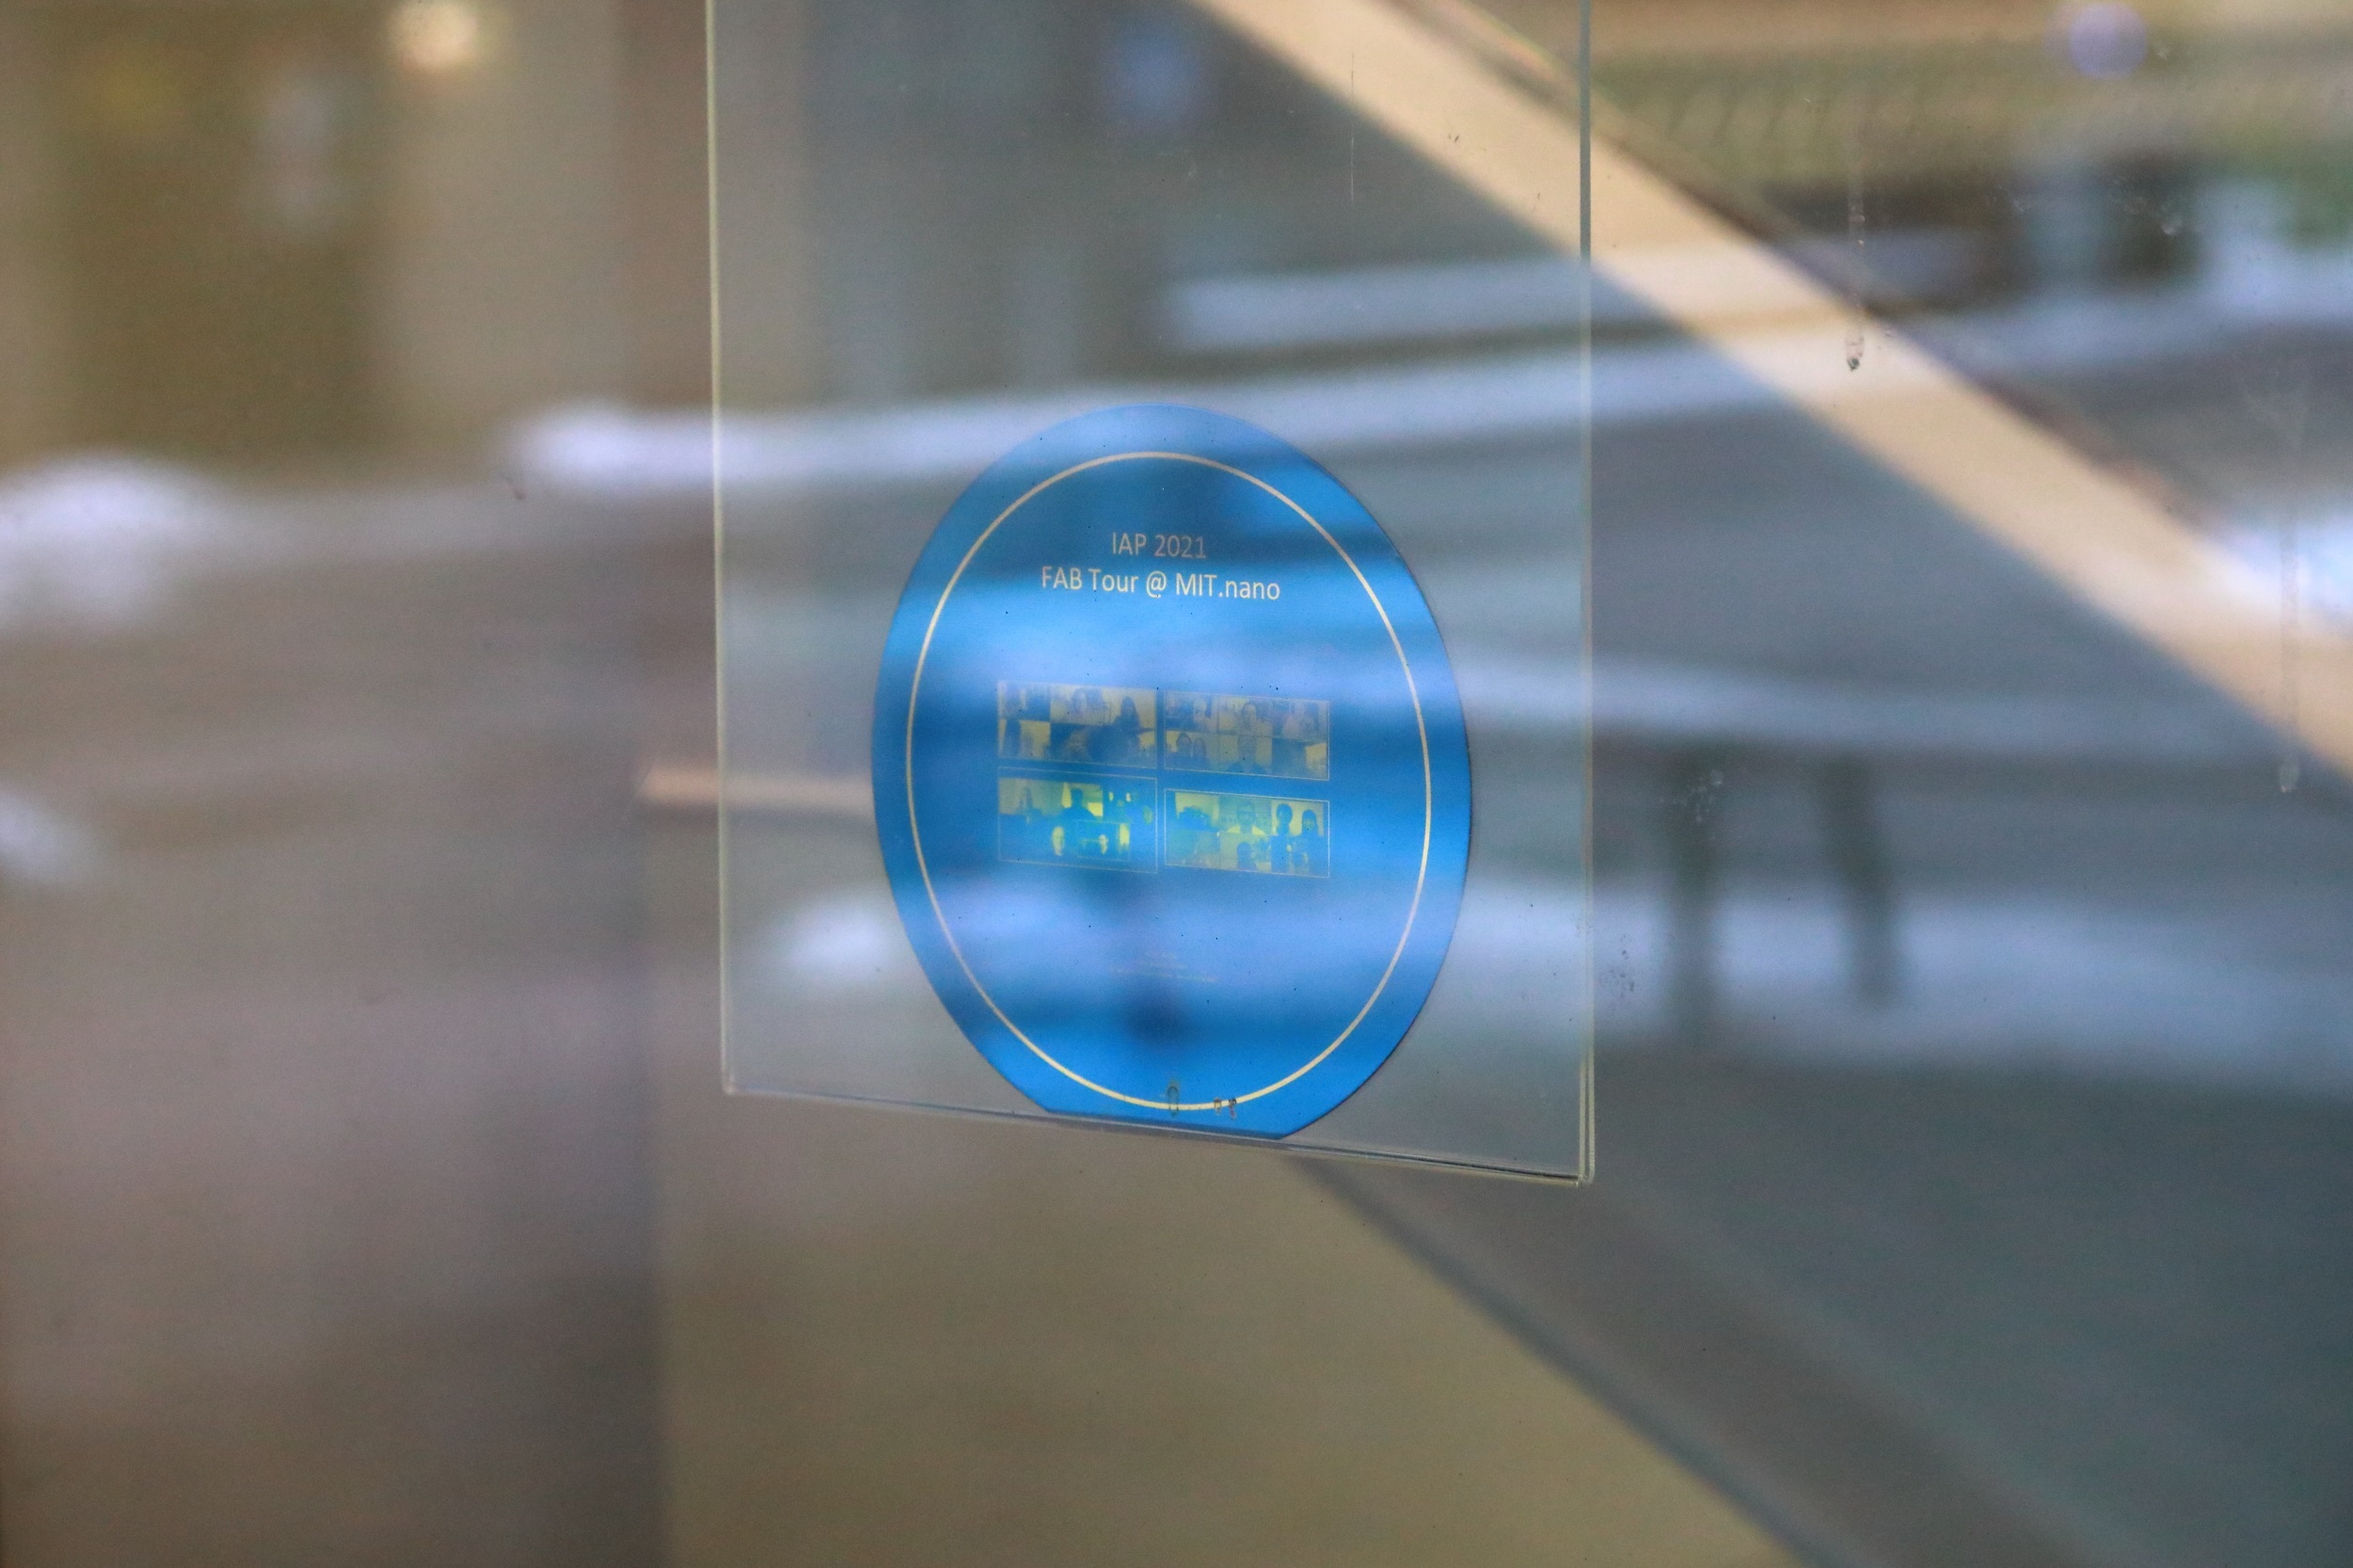 The final product, a silicon wafer fabricated at MIT.nano and etched with screenshots of the IAP participants, hangs in the West Lobby window at MIT.nano.